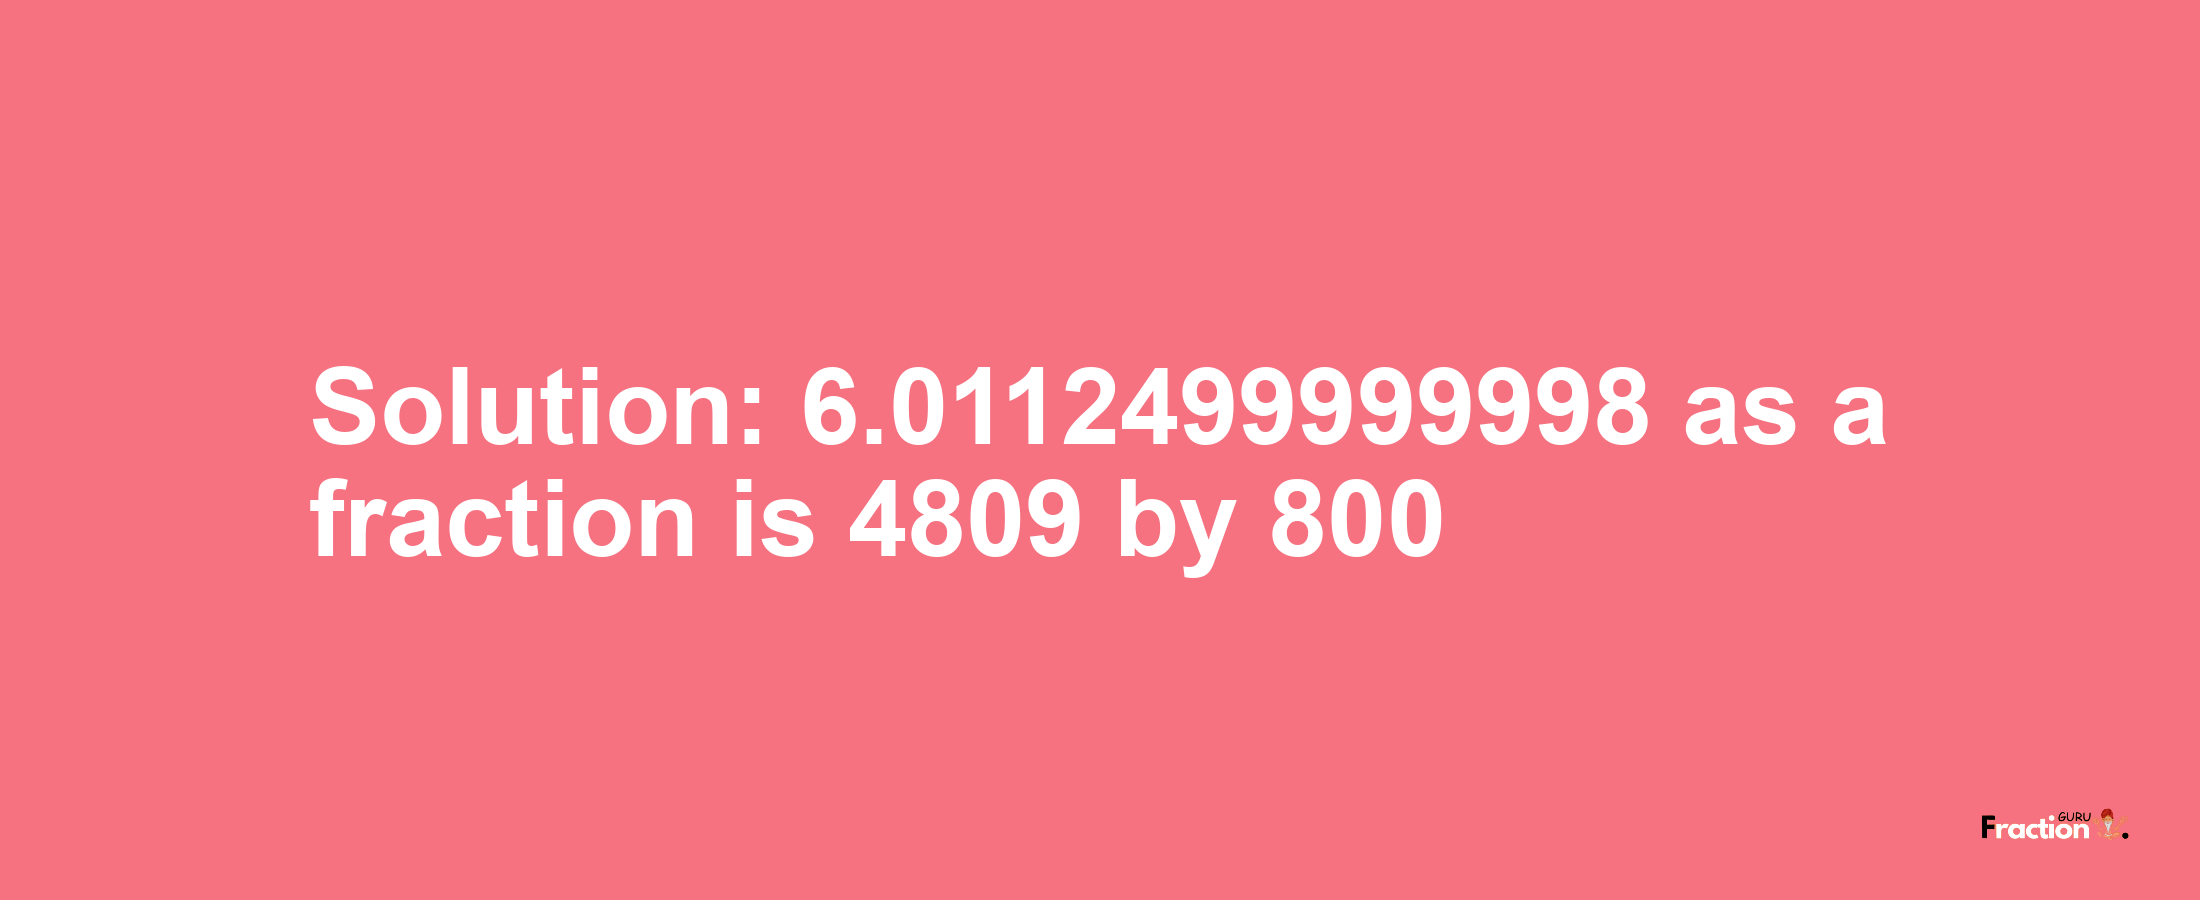 Solution:6.0112499999998 as a fraction is 4809/800